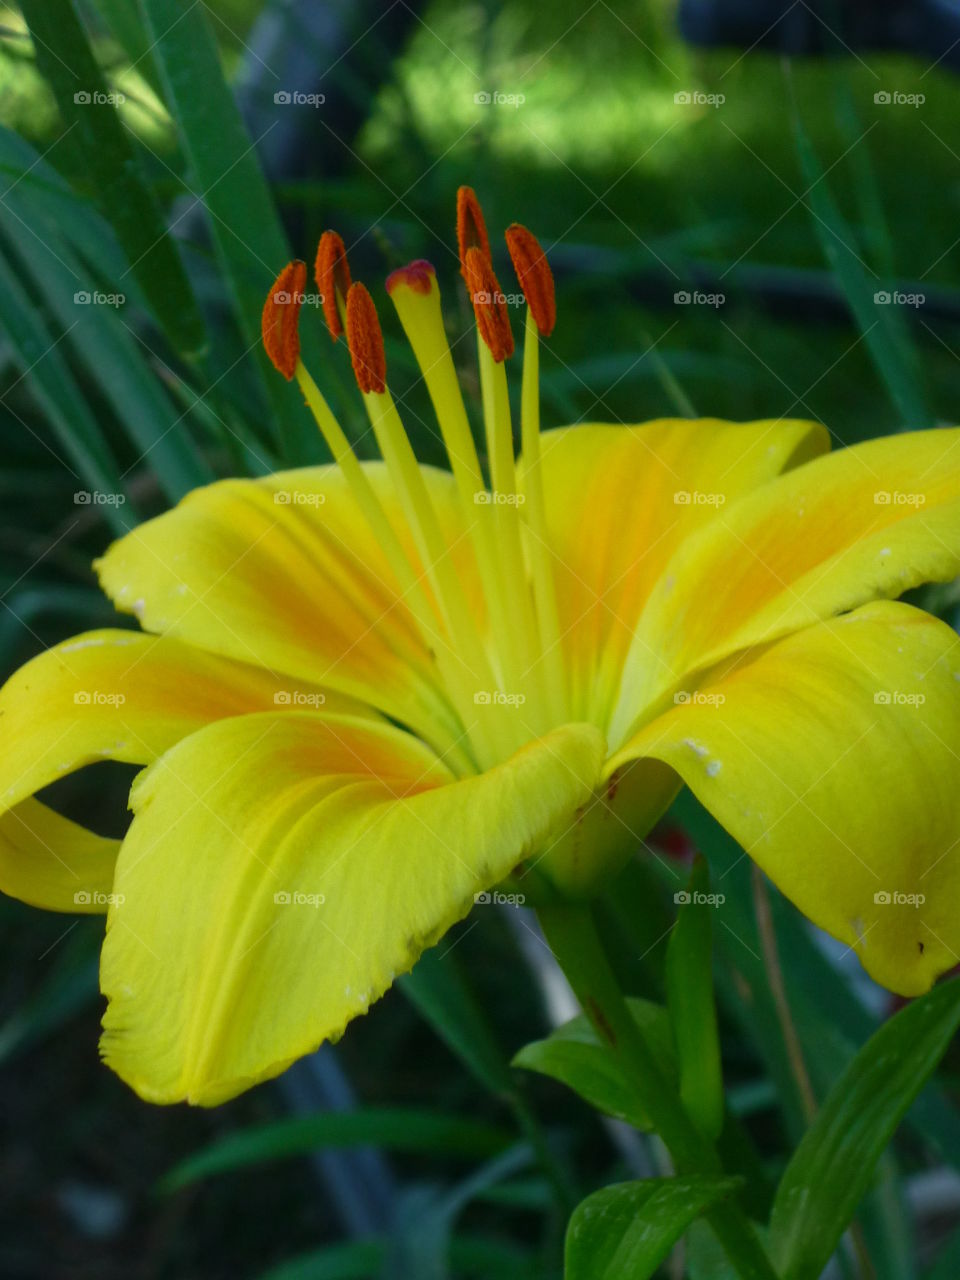 yellow lily up close